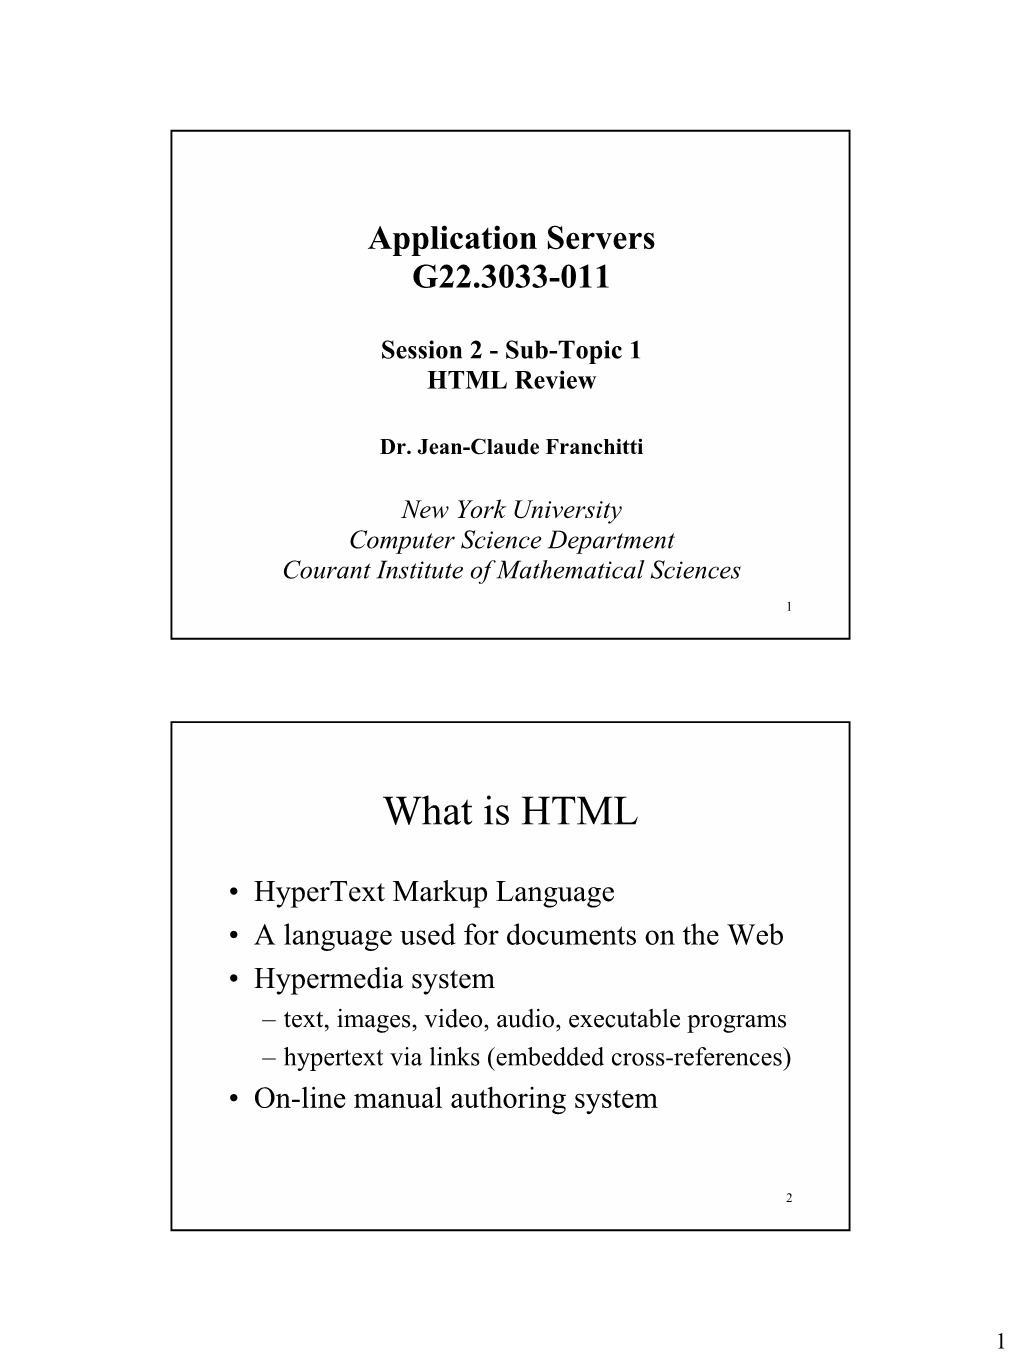 Session 2 - Sub-Topic 1 HTML Review